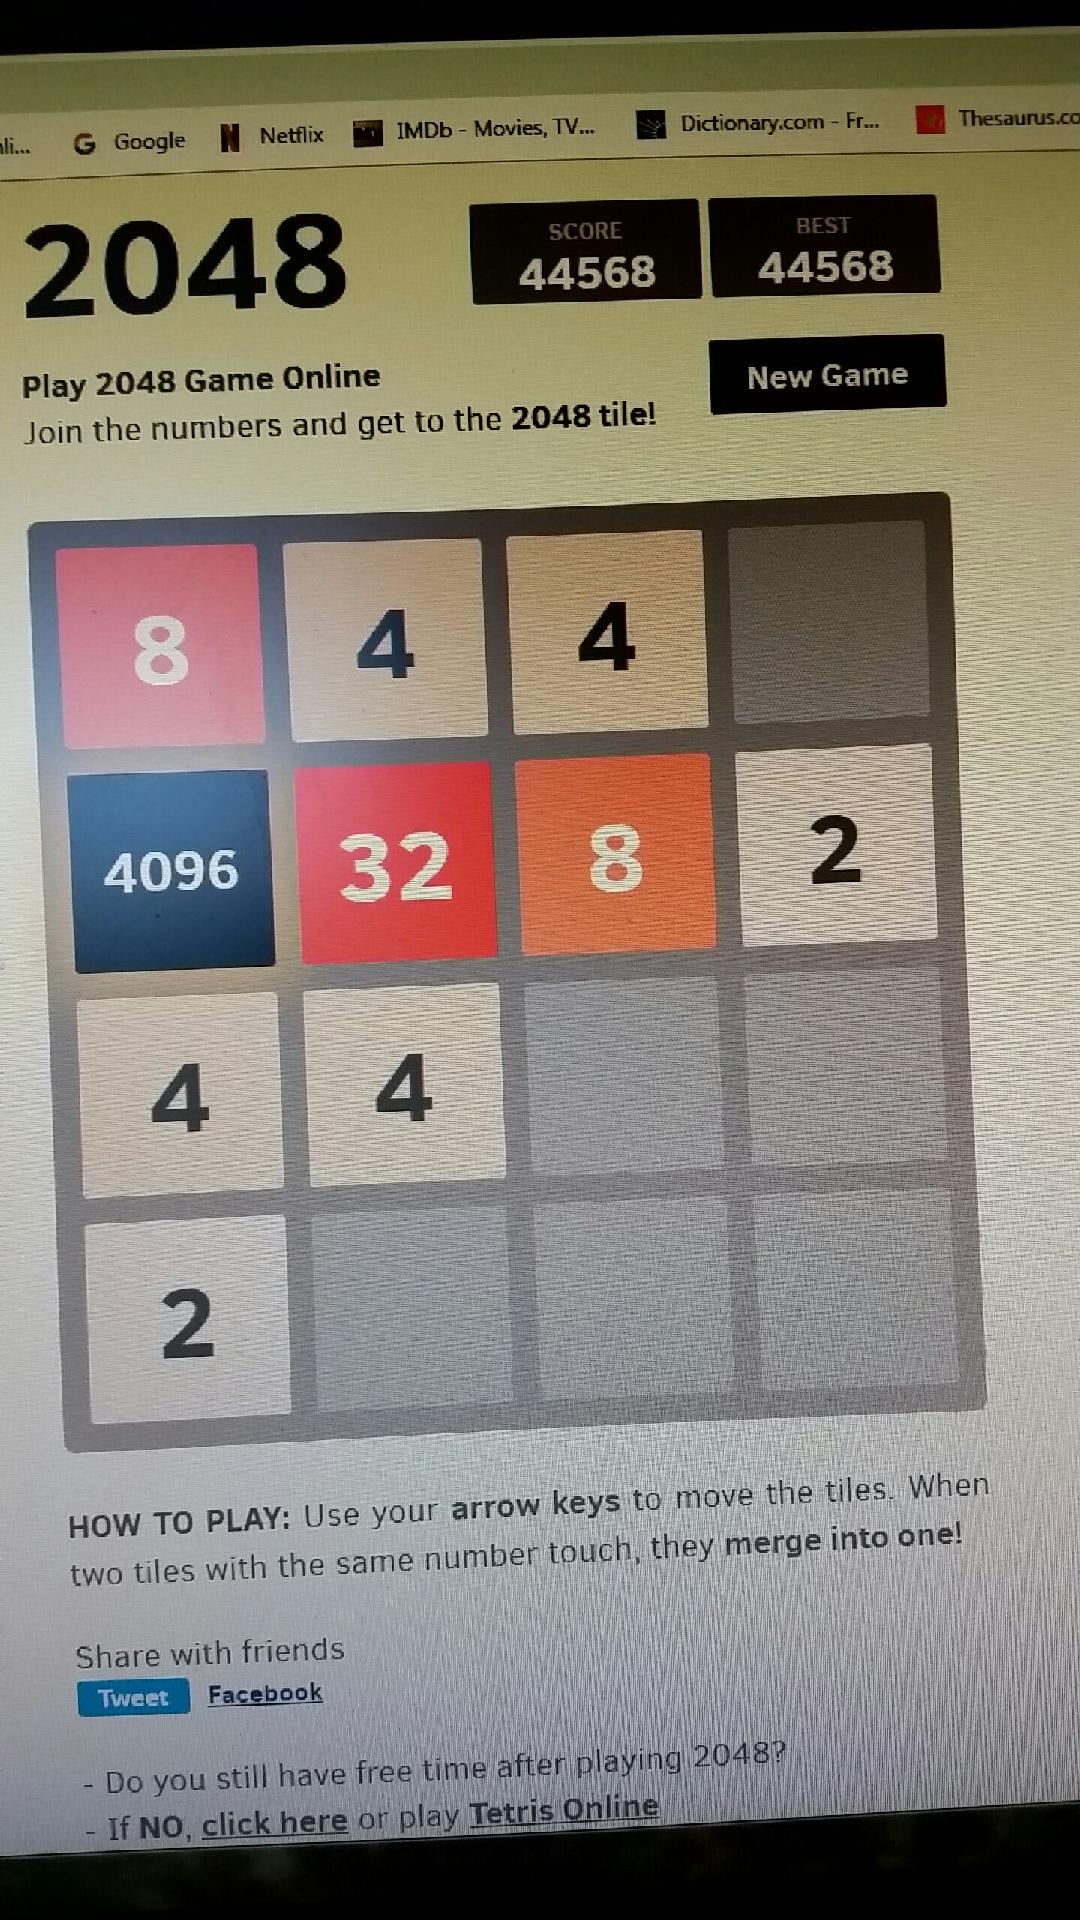 What is your highest tile in 2048? - Quora